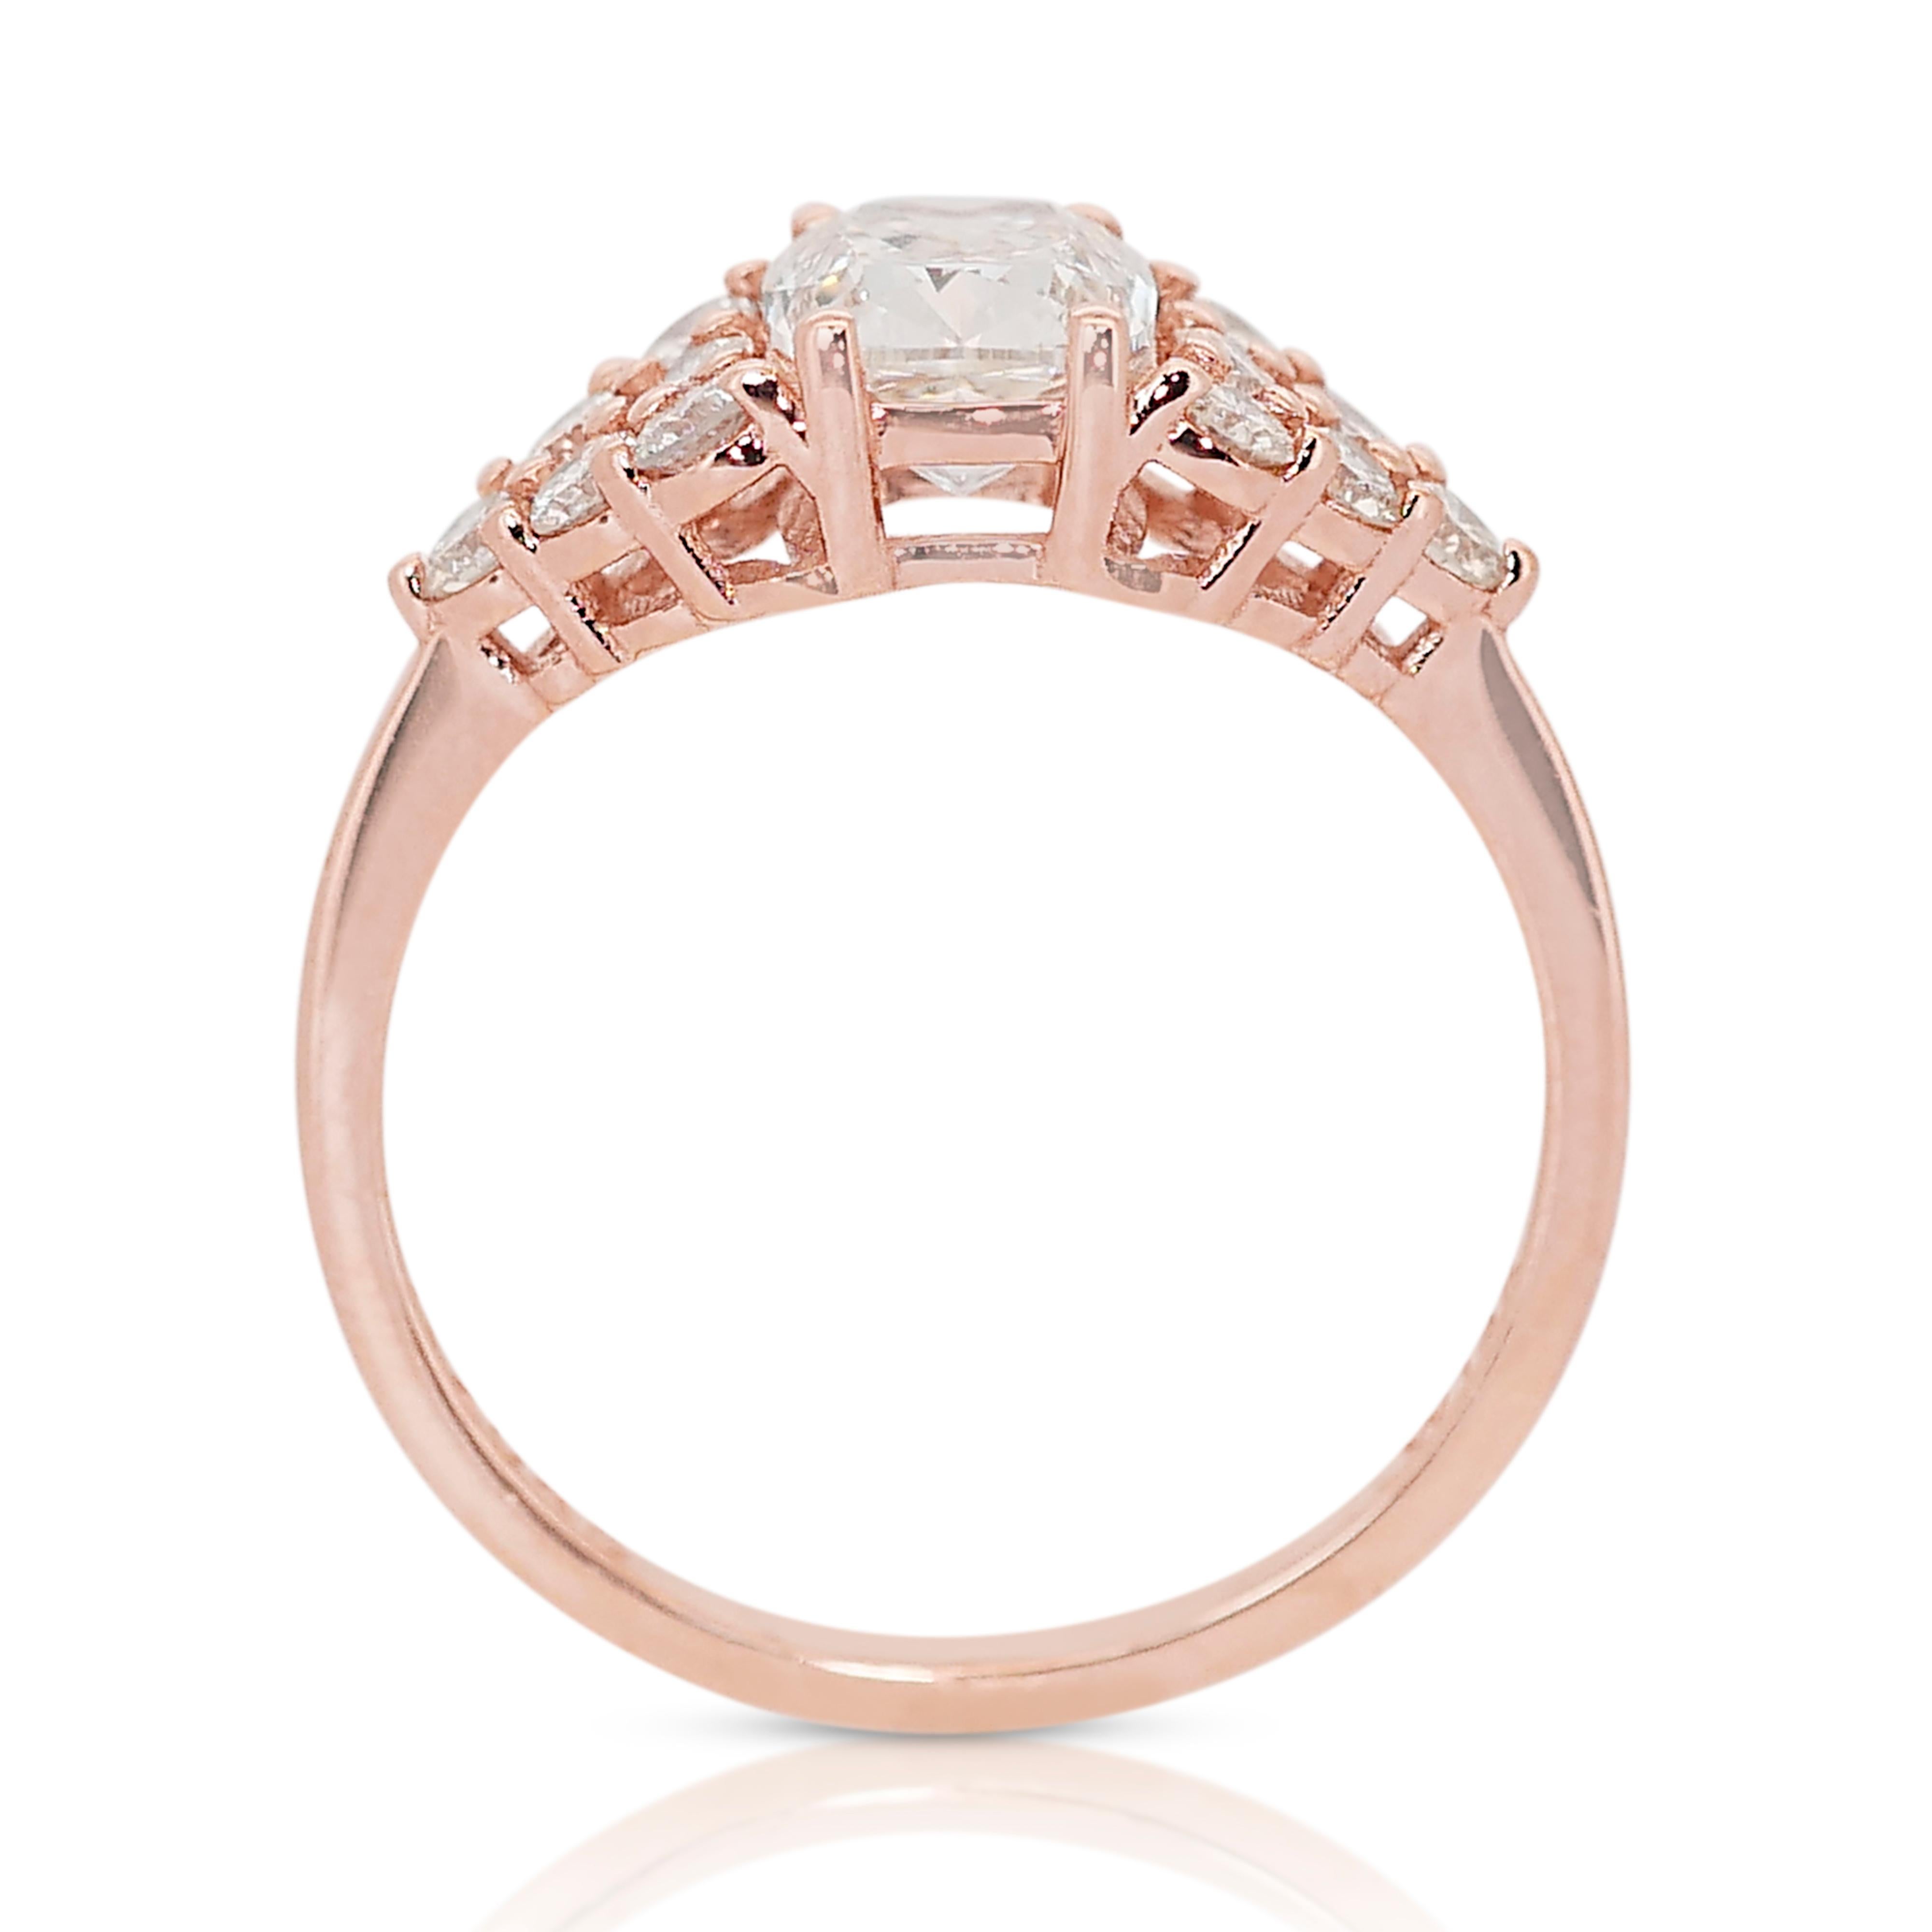 Lovely 1.65ct Diamonds Pave Ring in 14k Rose Gold - IGI Certified For Sale 1